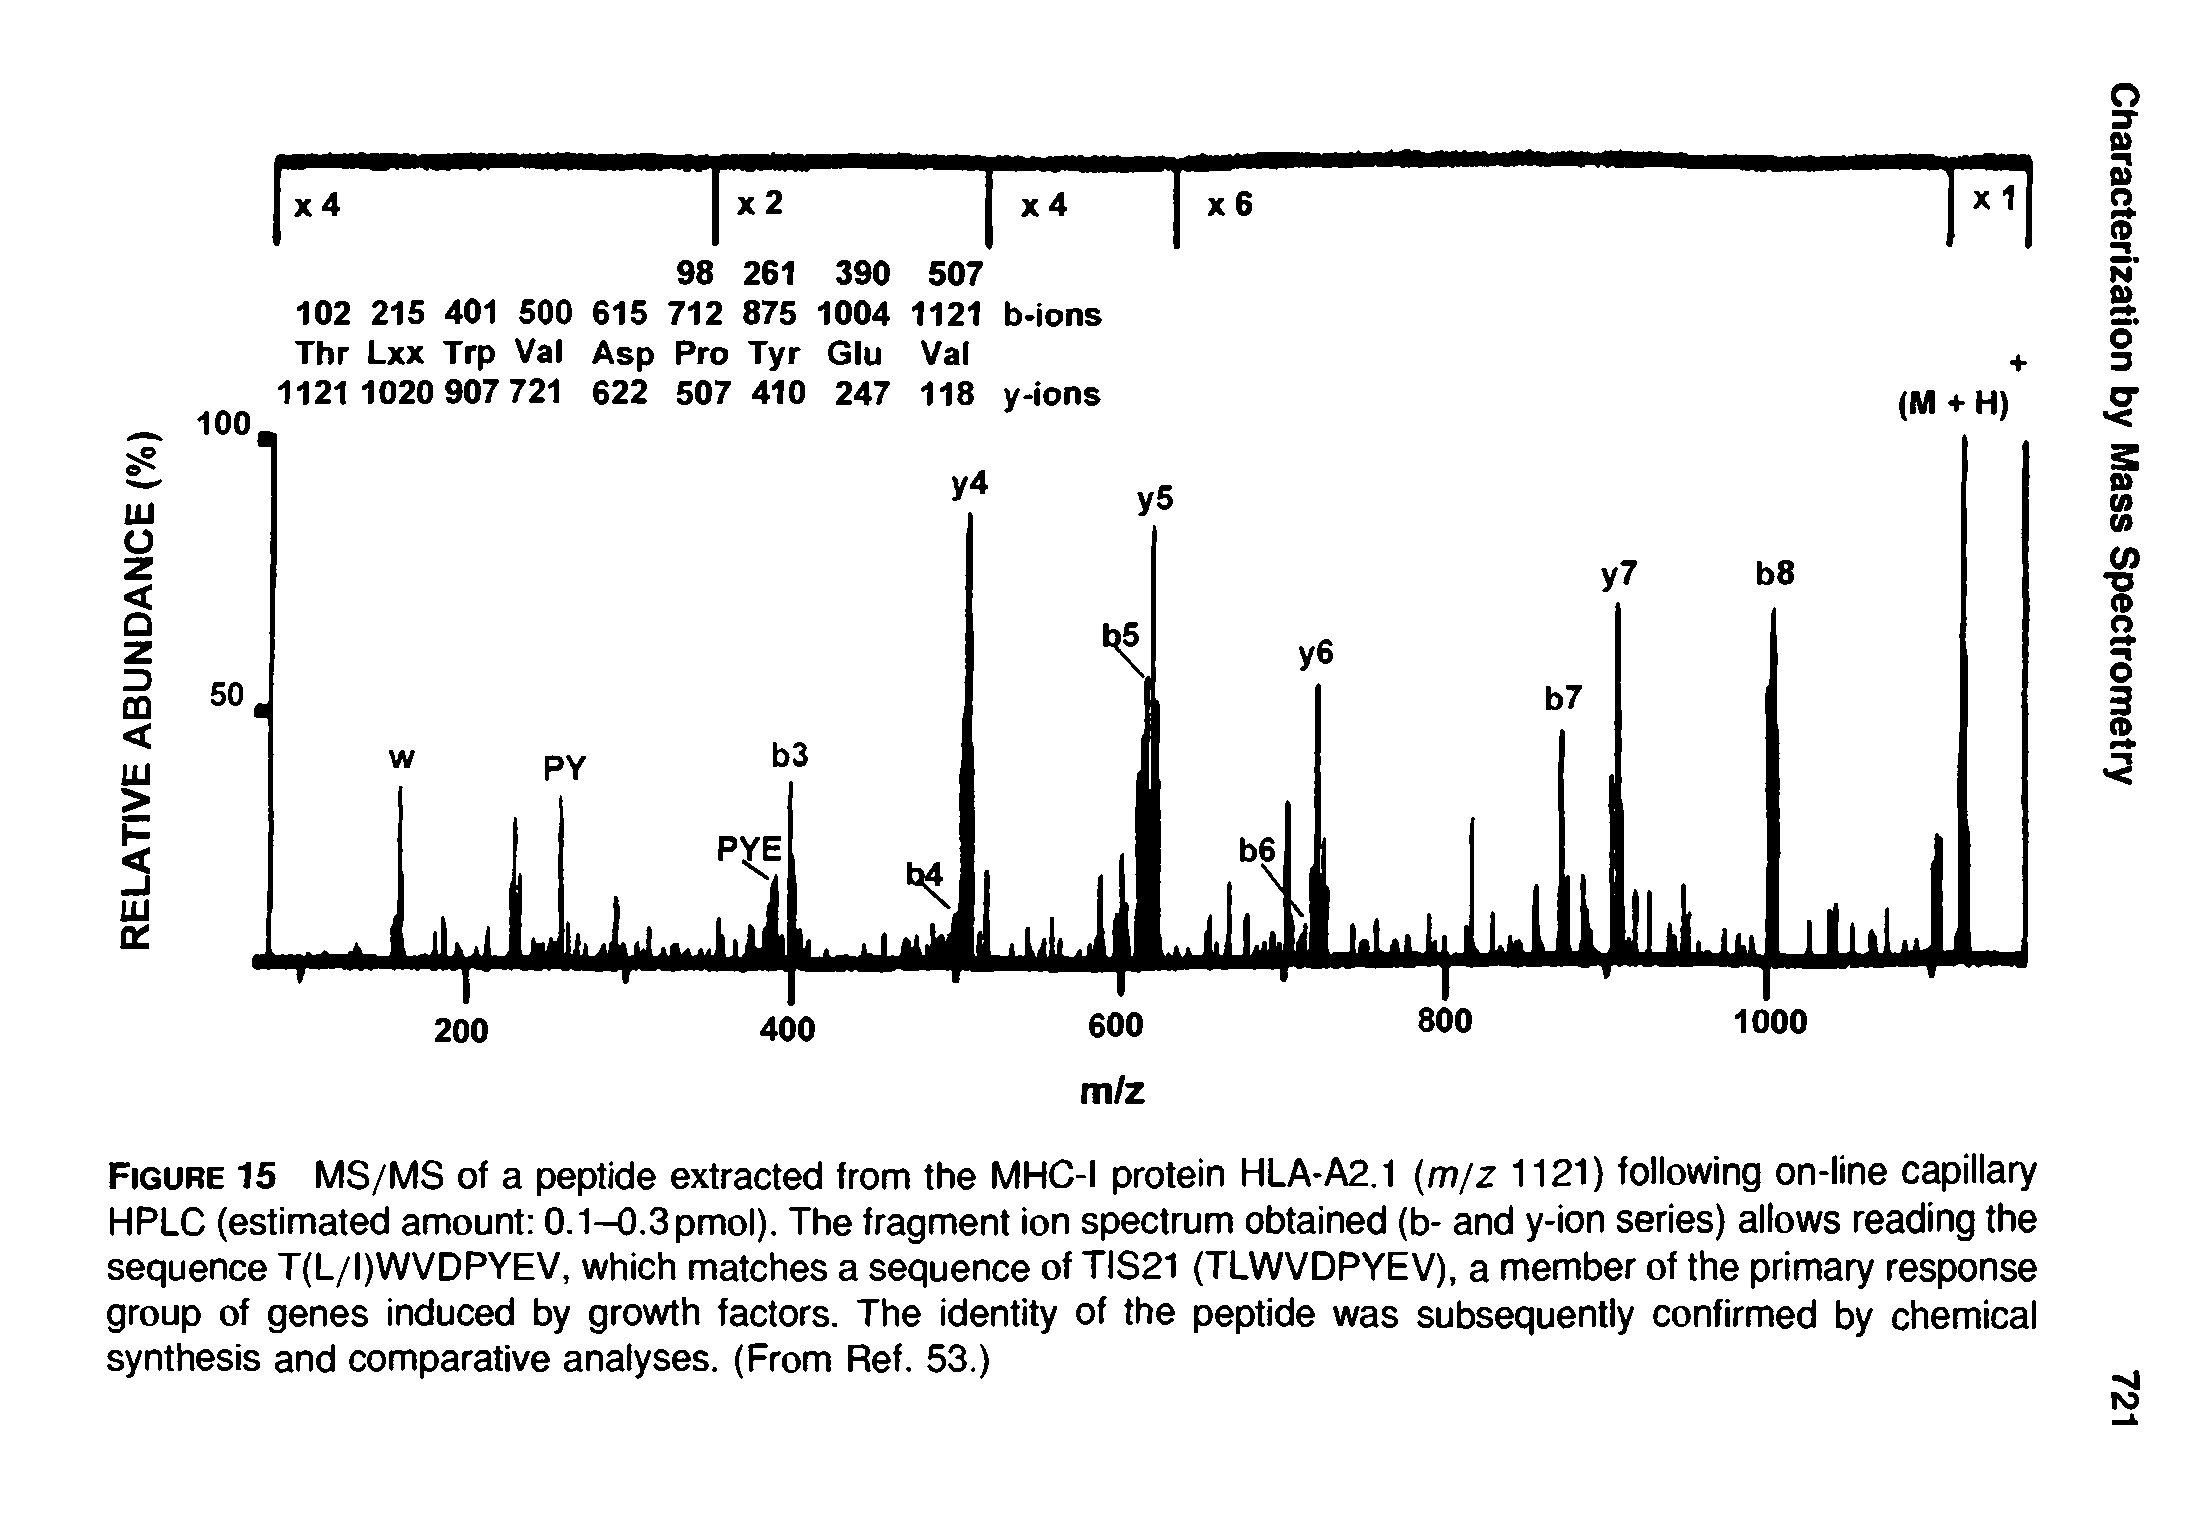 Figure 15 MS/MS of a peptide extracted from the MHC-I protein HLA-A2.1 m/z 1121) following on-line capillary HPLC (estimated amount 0.1-0.3 pmol). The fragment ion spectrum obtained (b- and y-ion series) allows reading the sequence T(L/I)WVDPYEV, which matches a sequence of TIS21 (TLWVDPYEV), a member of the primary response group of genes induced by growth factors. The identity of the peptide was subsequently confirmed by chemical synthesis and comparative analyses. (From Ref. 53.)...